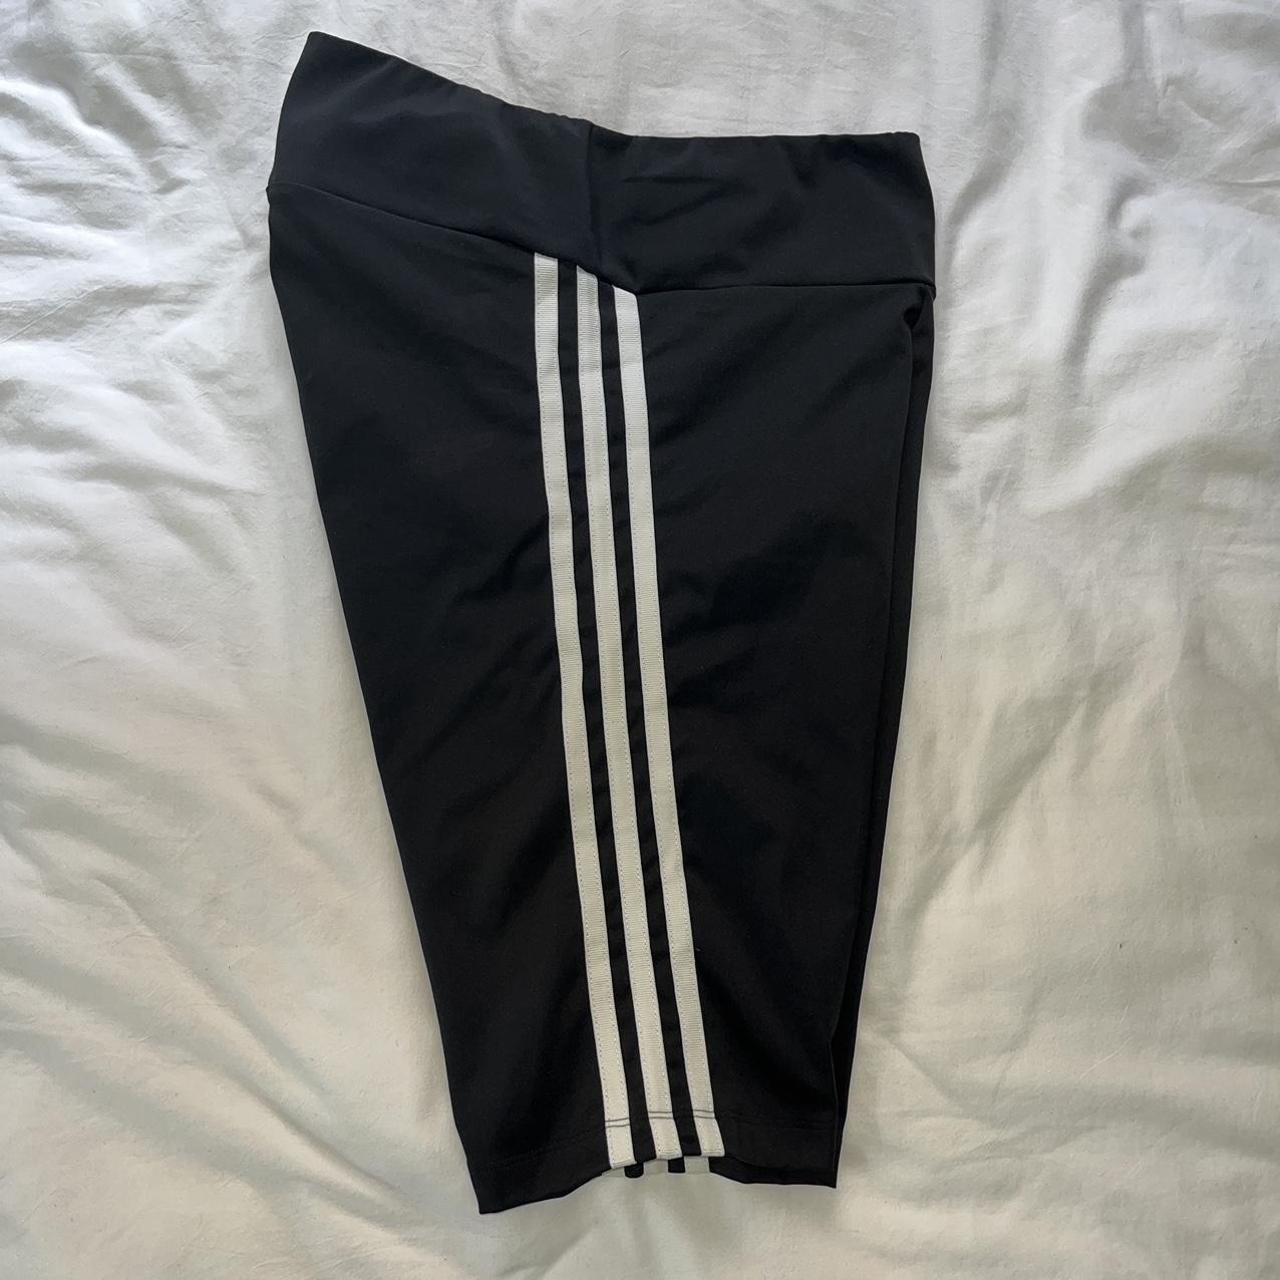 Adidas shorts Barely worn, great condition Size... - Depop